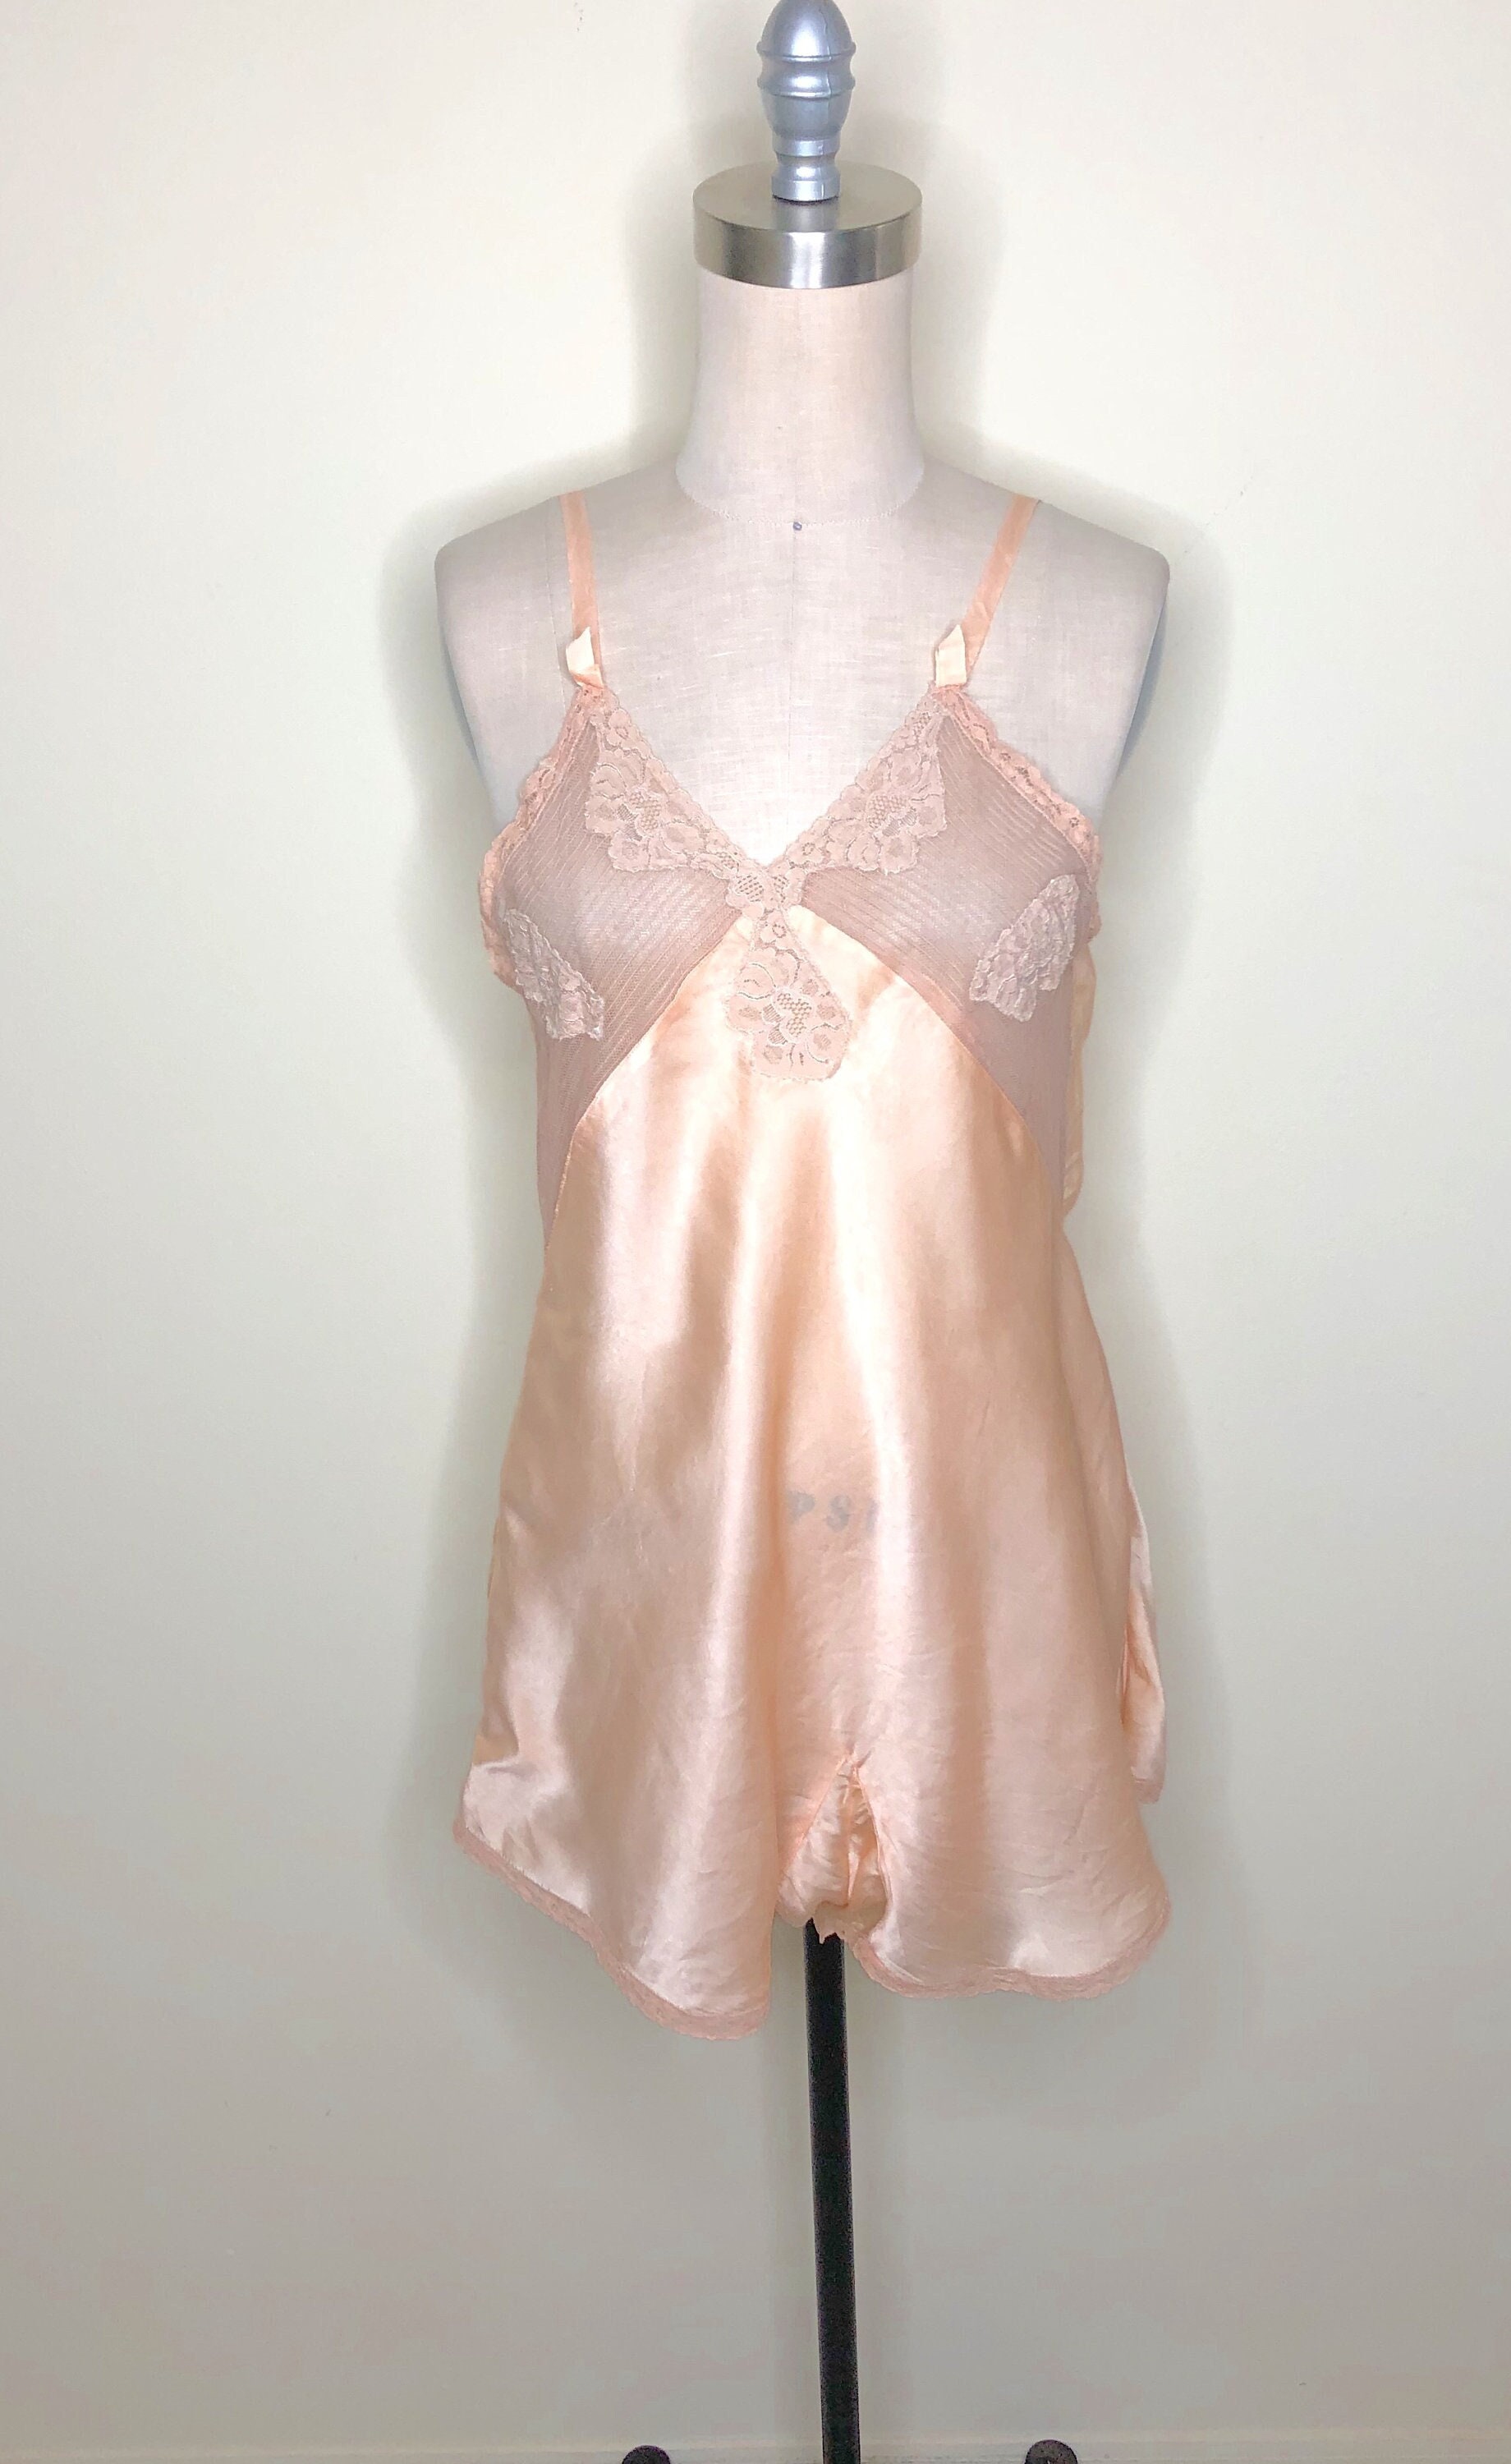 1940's Chemise, Step in Chemise, Lace Trimmed Lingerie, Peach Teddy,  Vintage Teddy 